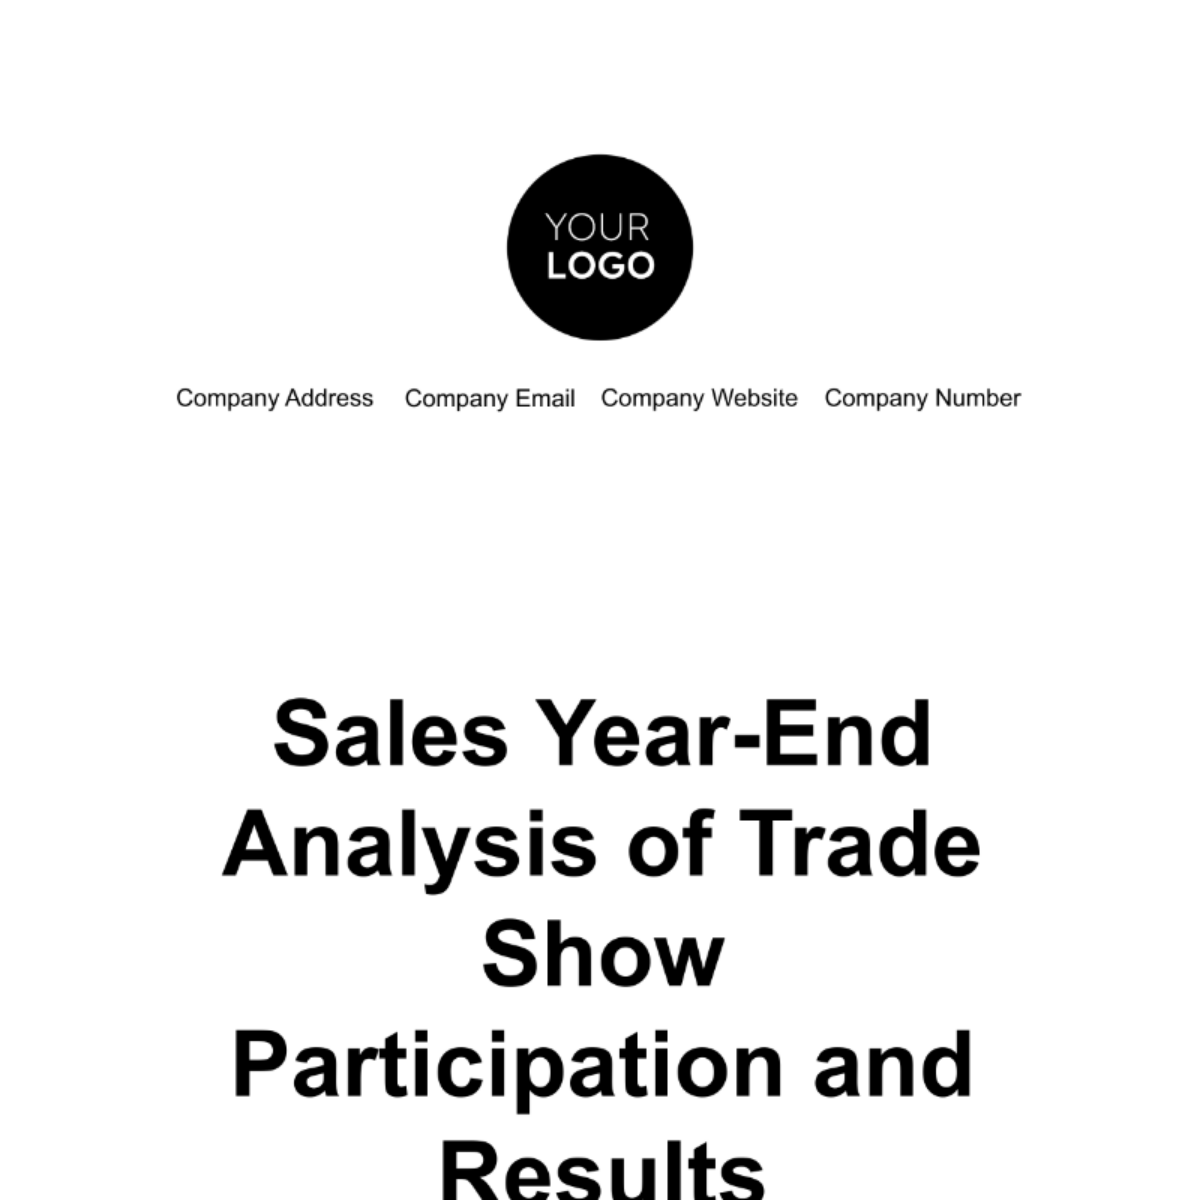 Free Sales Year-End Analysis of Trade Show Participation and Results Template